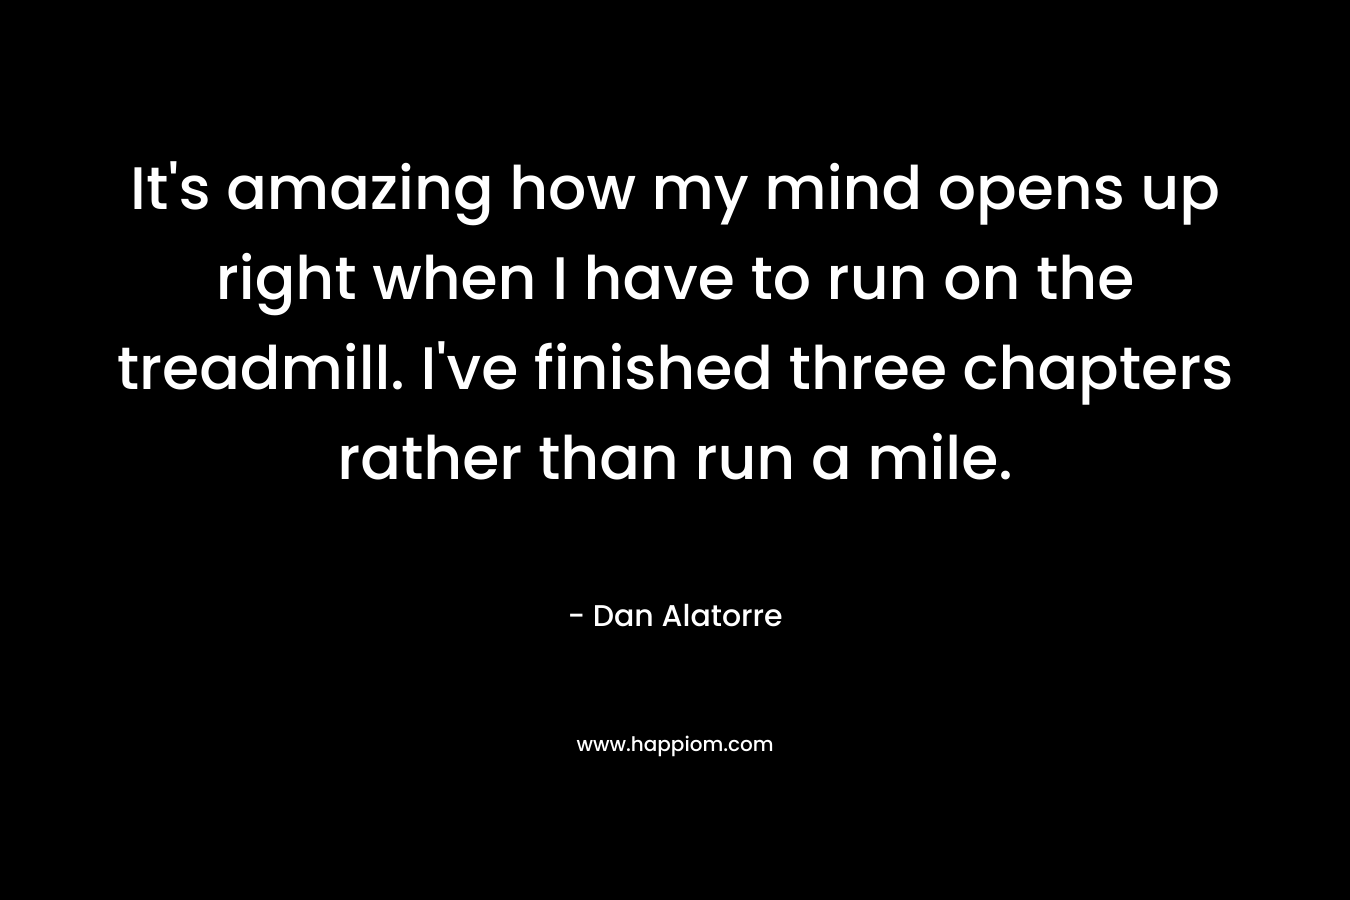 It’s amazing how my mind opens up right when I have to run on the treadmill. I’ve finished three chapters rather than run a mile. – Dan Alatorre